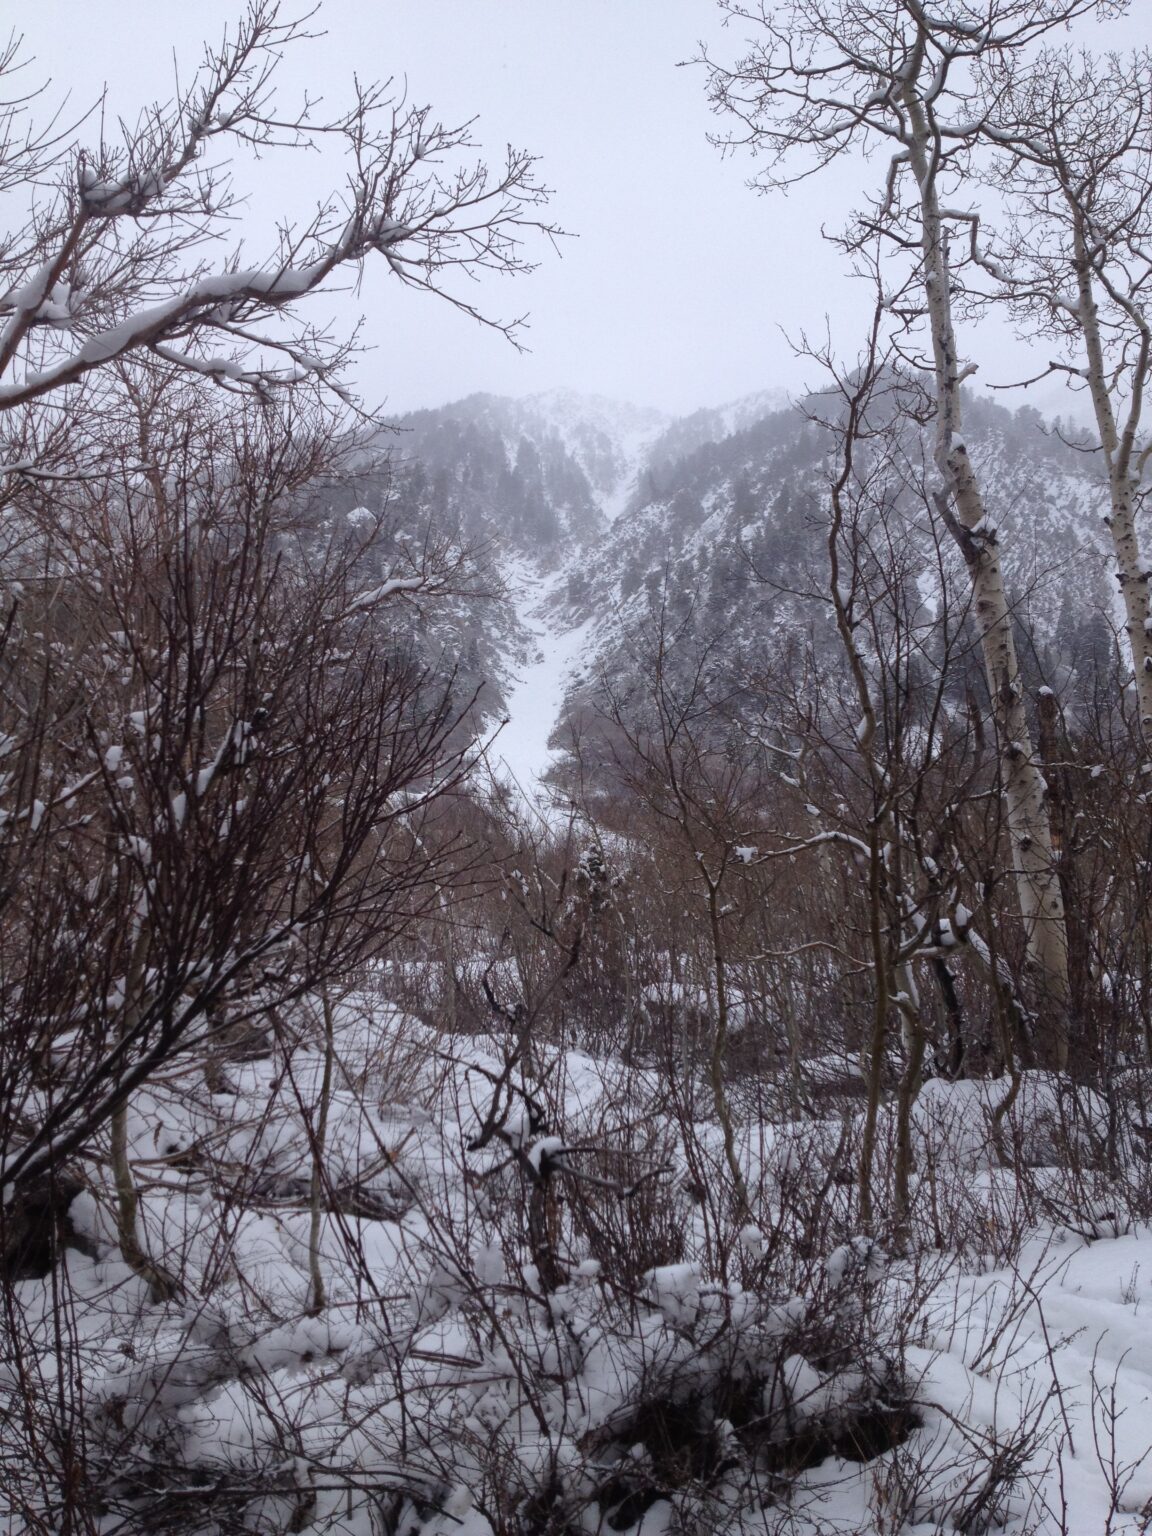 Looking back up the White Pine chute from the Little Cottonwood Canyon Road